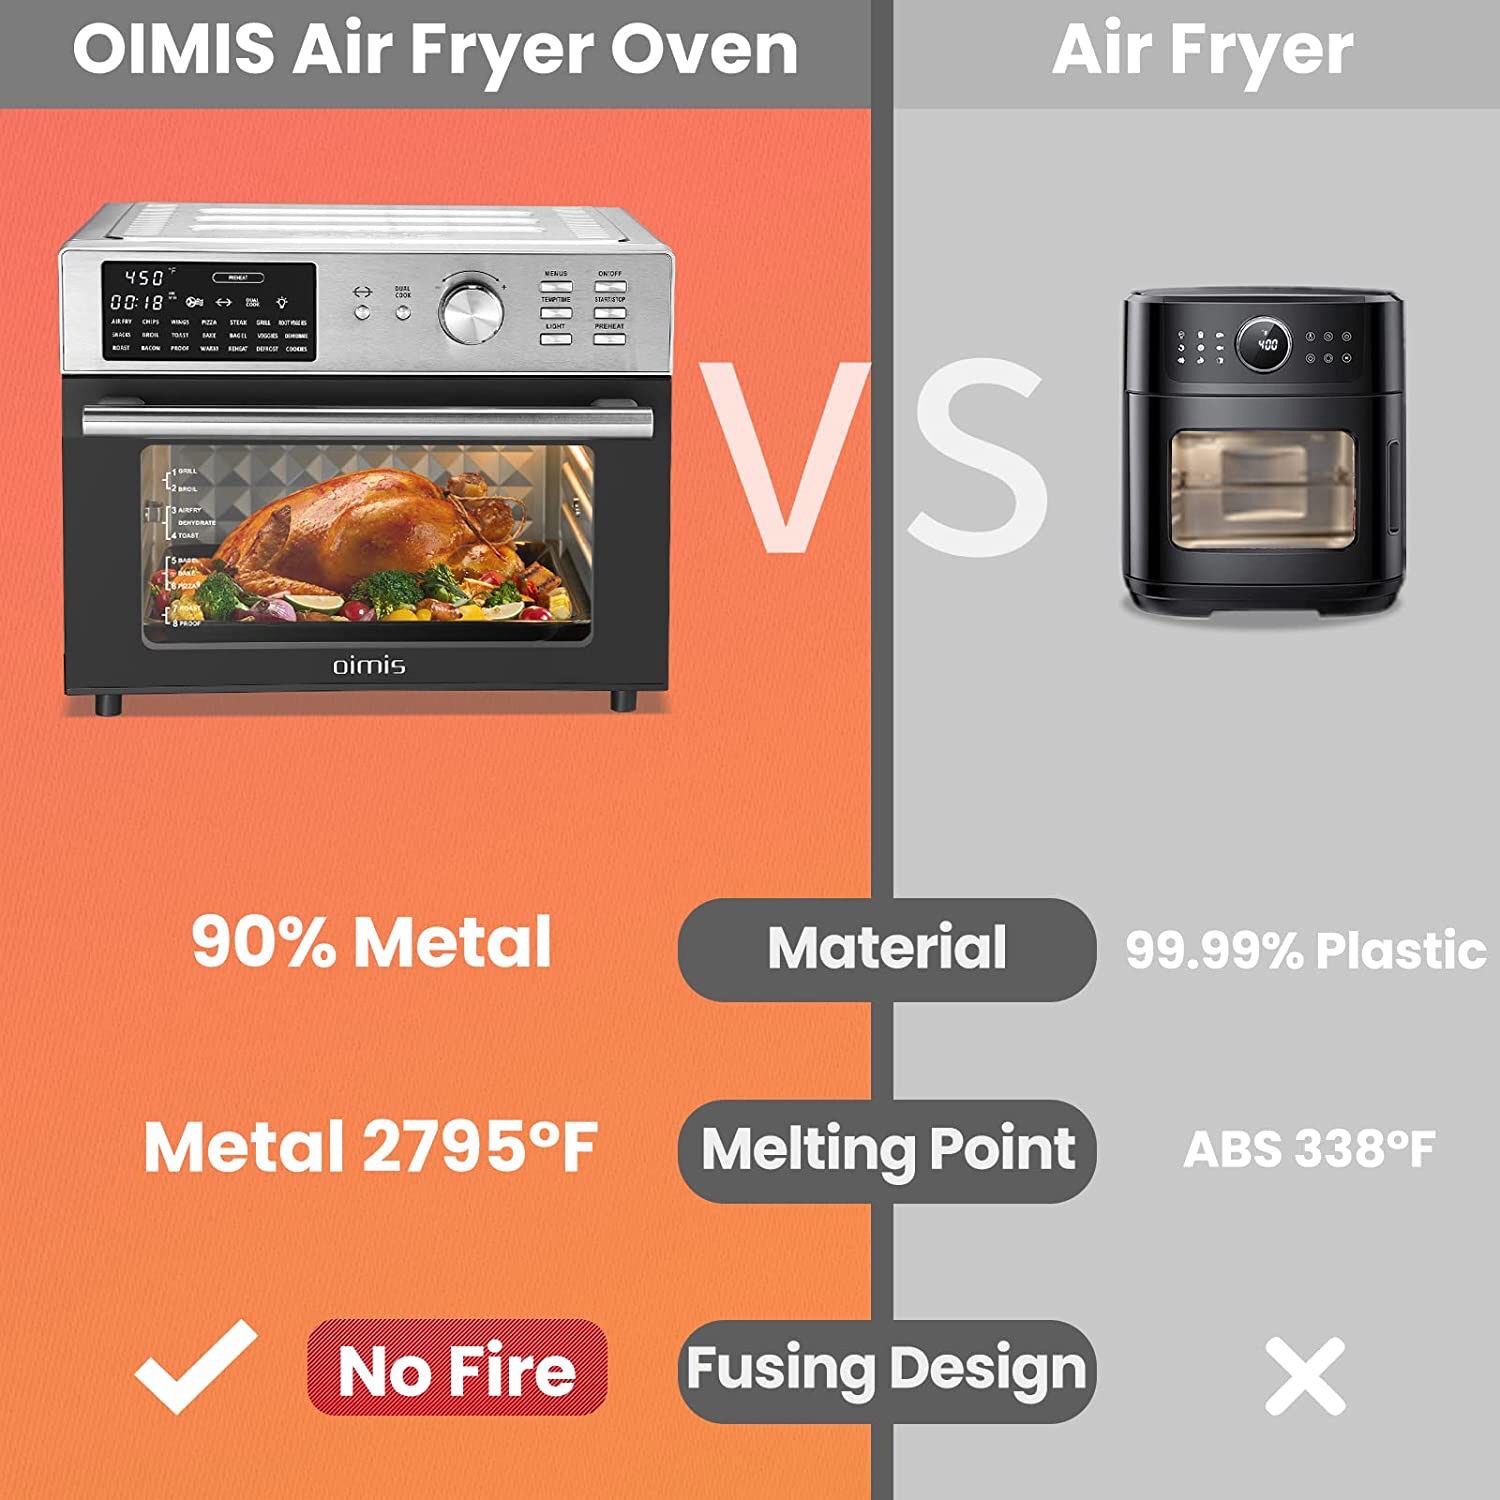 Air Fryer Oven OIMIS,32QT X-Large Air Fryer Toaster Oven Stainless